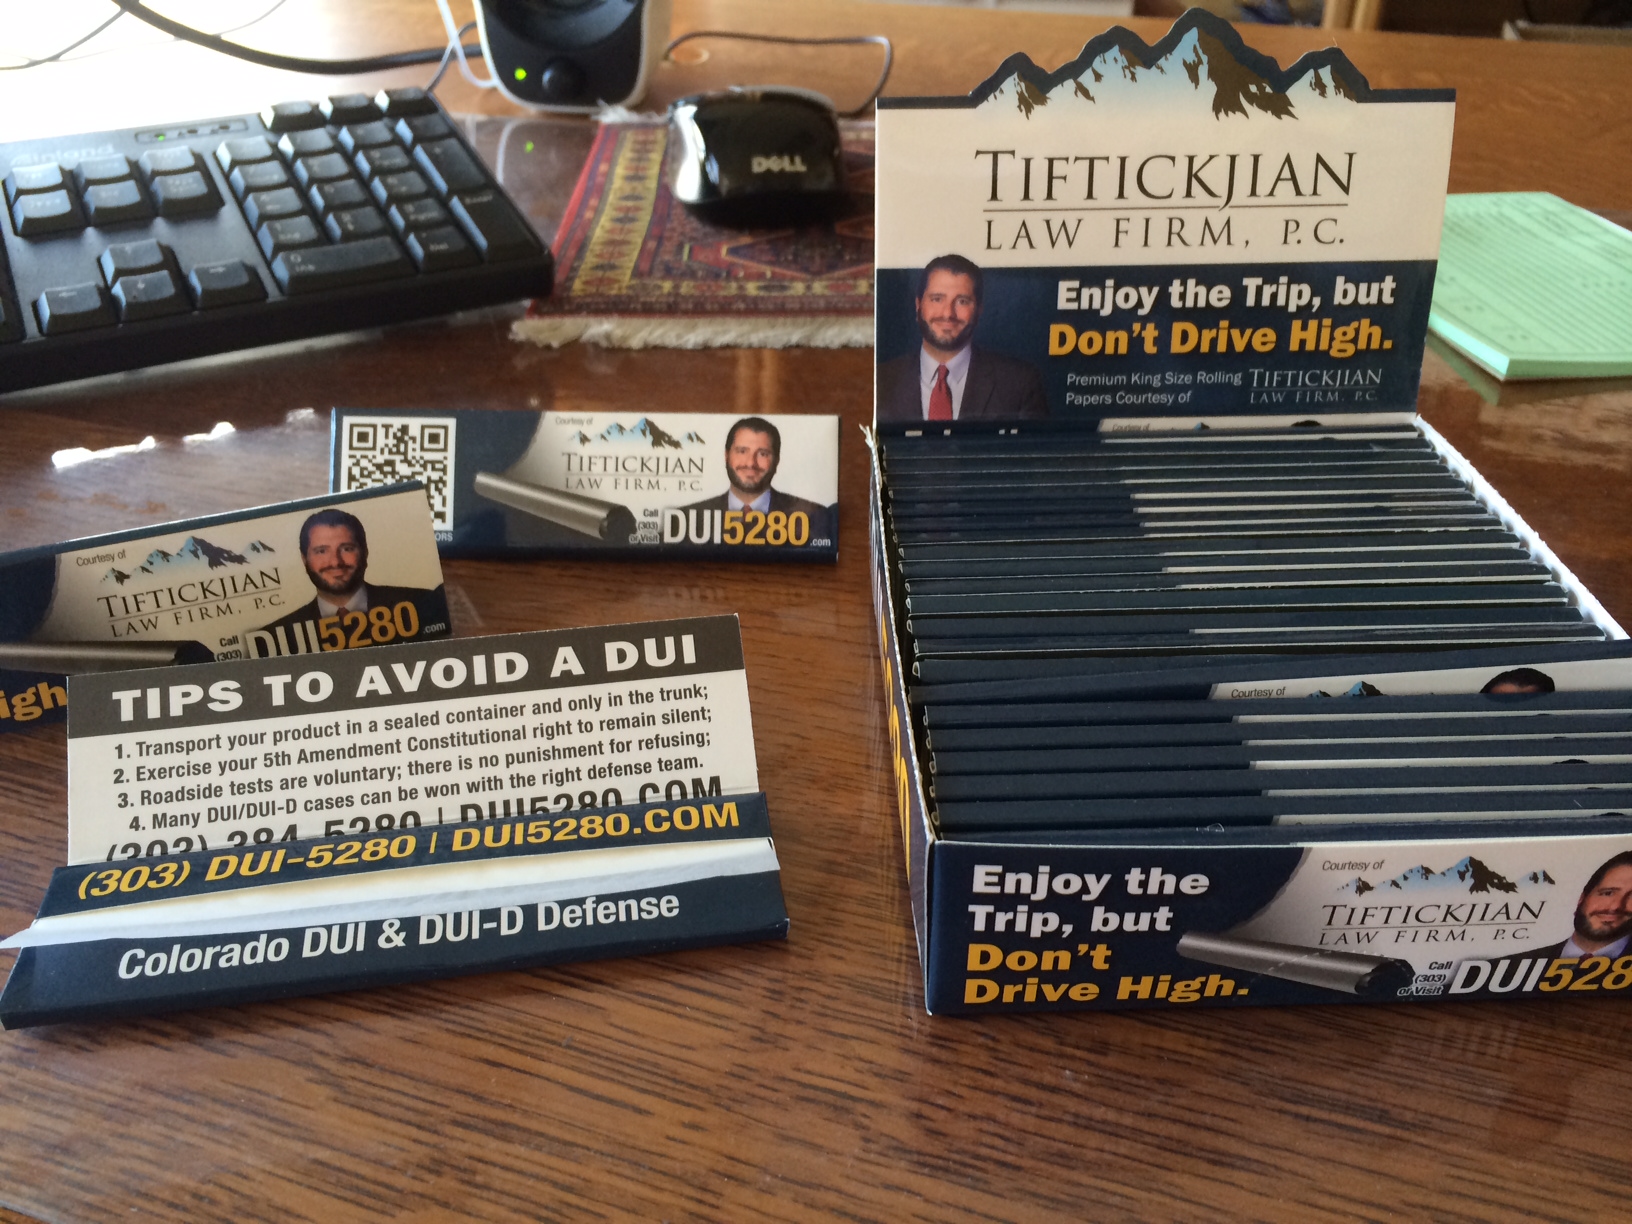 Denver attorney Jay Tiftickjian is marketing smart by giving away these rolling papers for free. (Tiftickjian Law Firm)